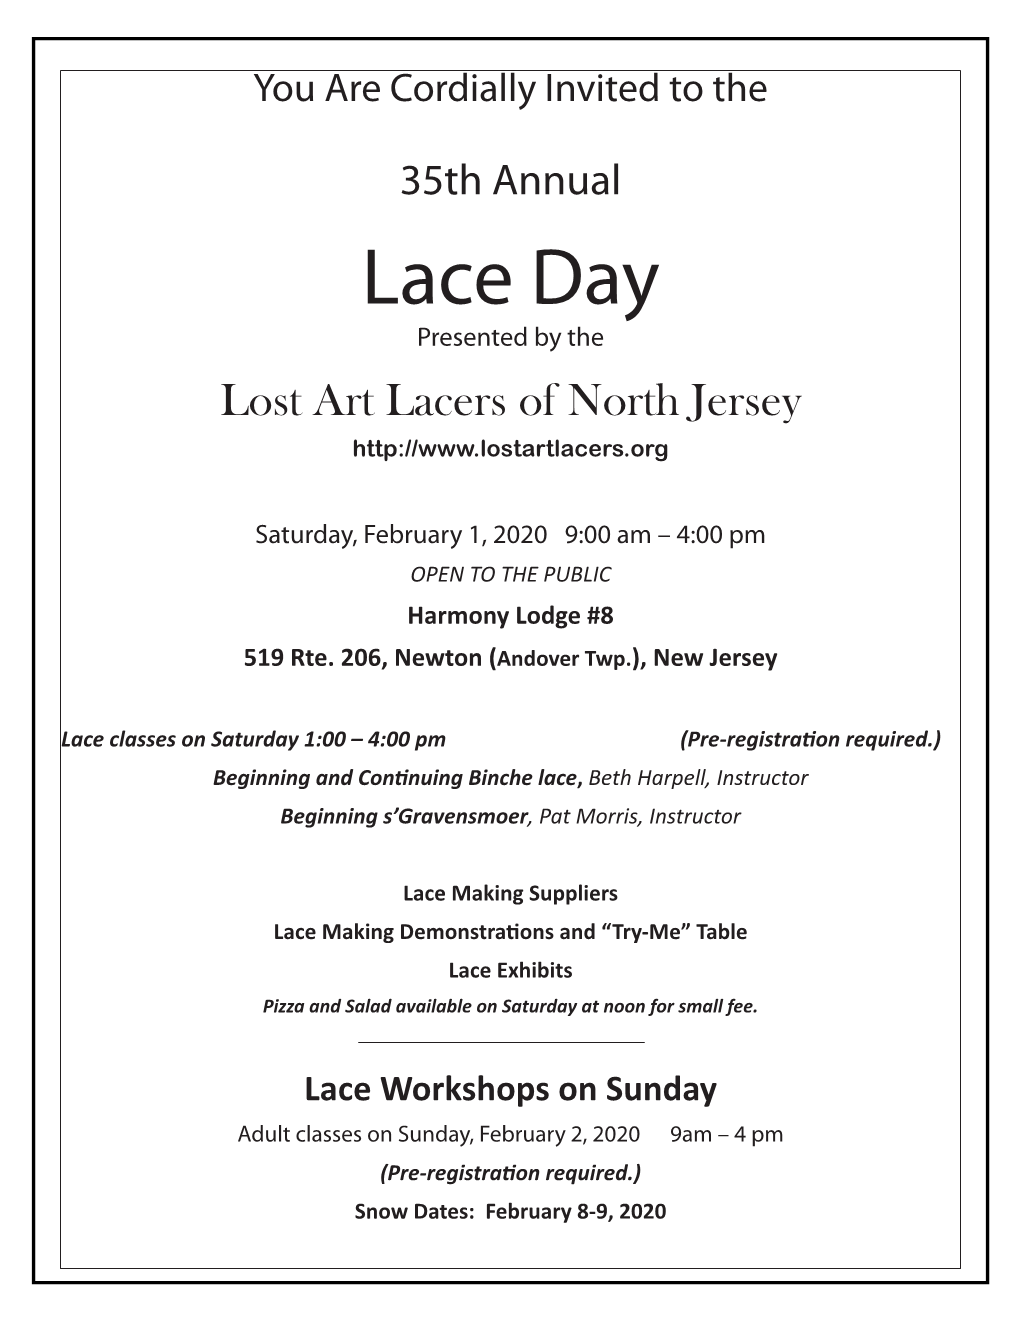 Lace Day Presented by the Lost Art Lacers of North Jersey